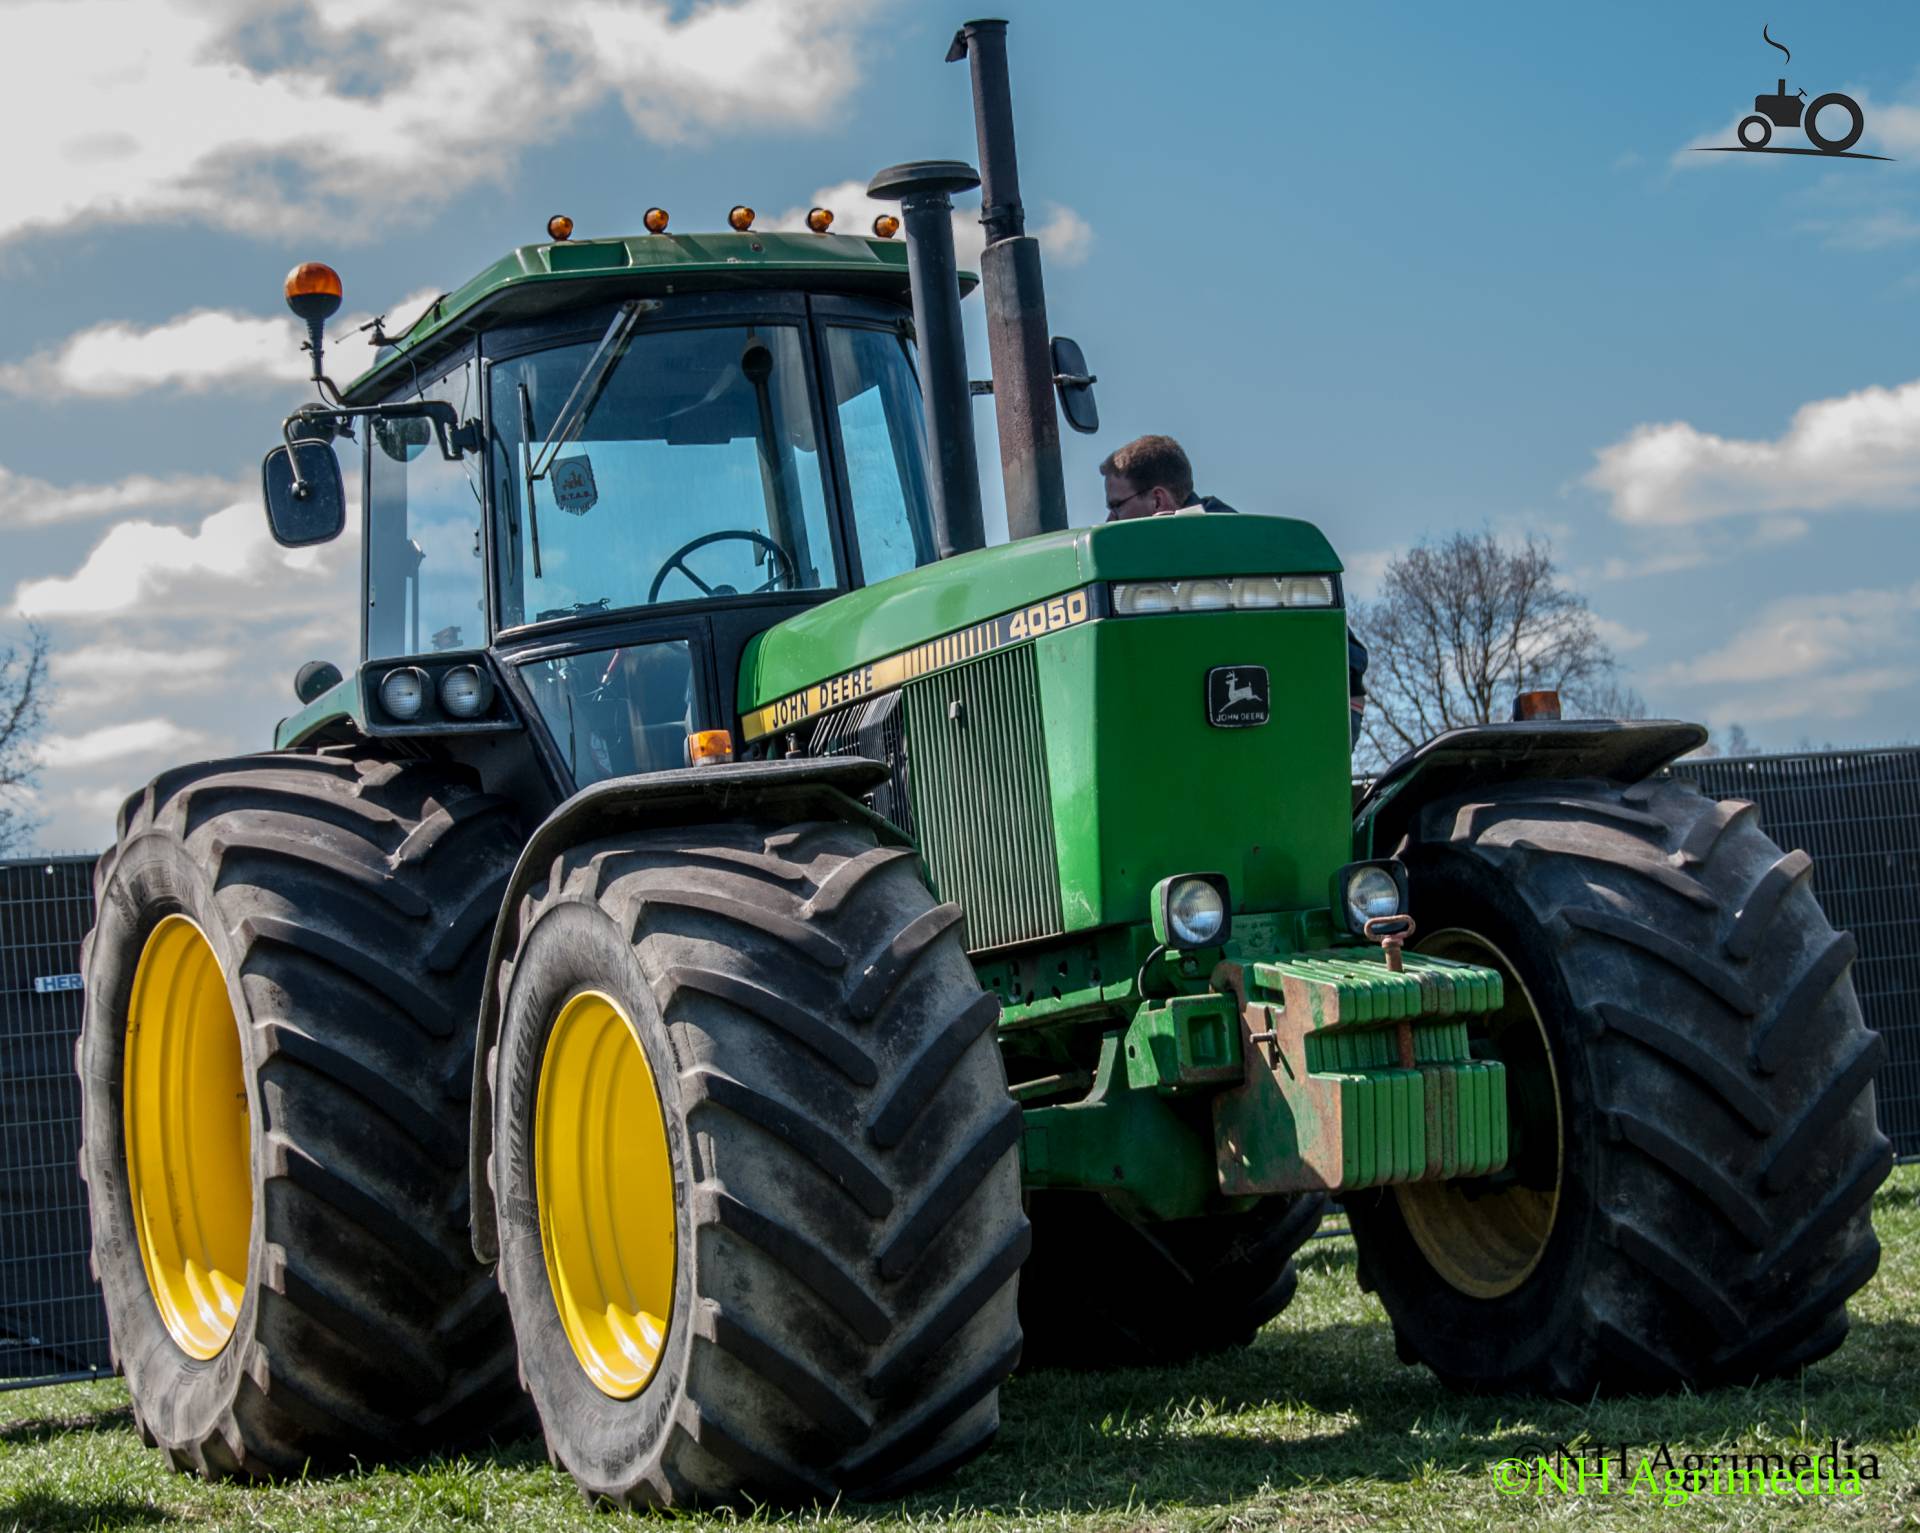 John Deere 4050 Specs and data - Everything about the John Deere 4050